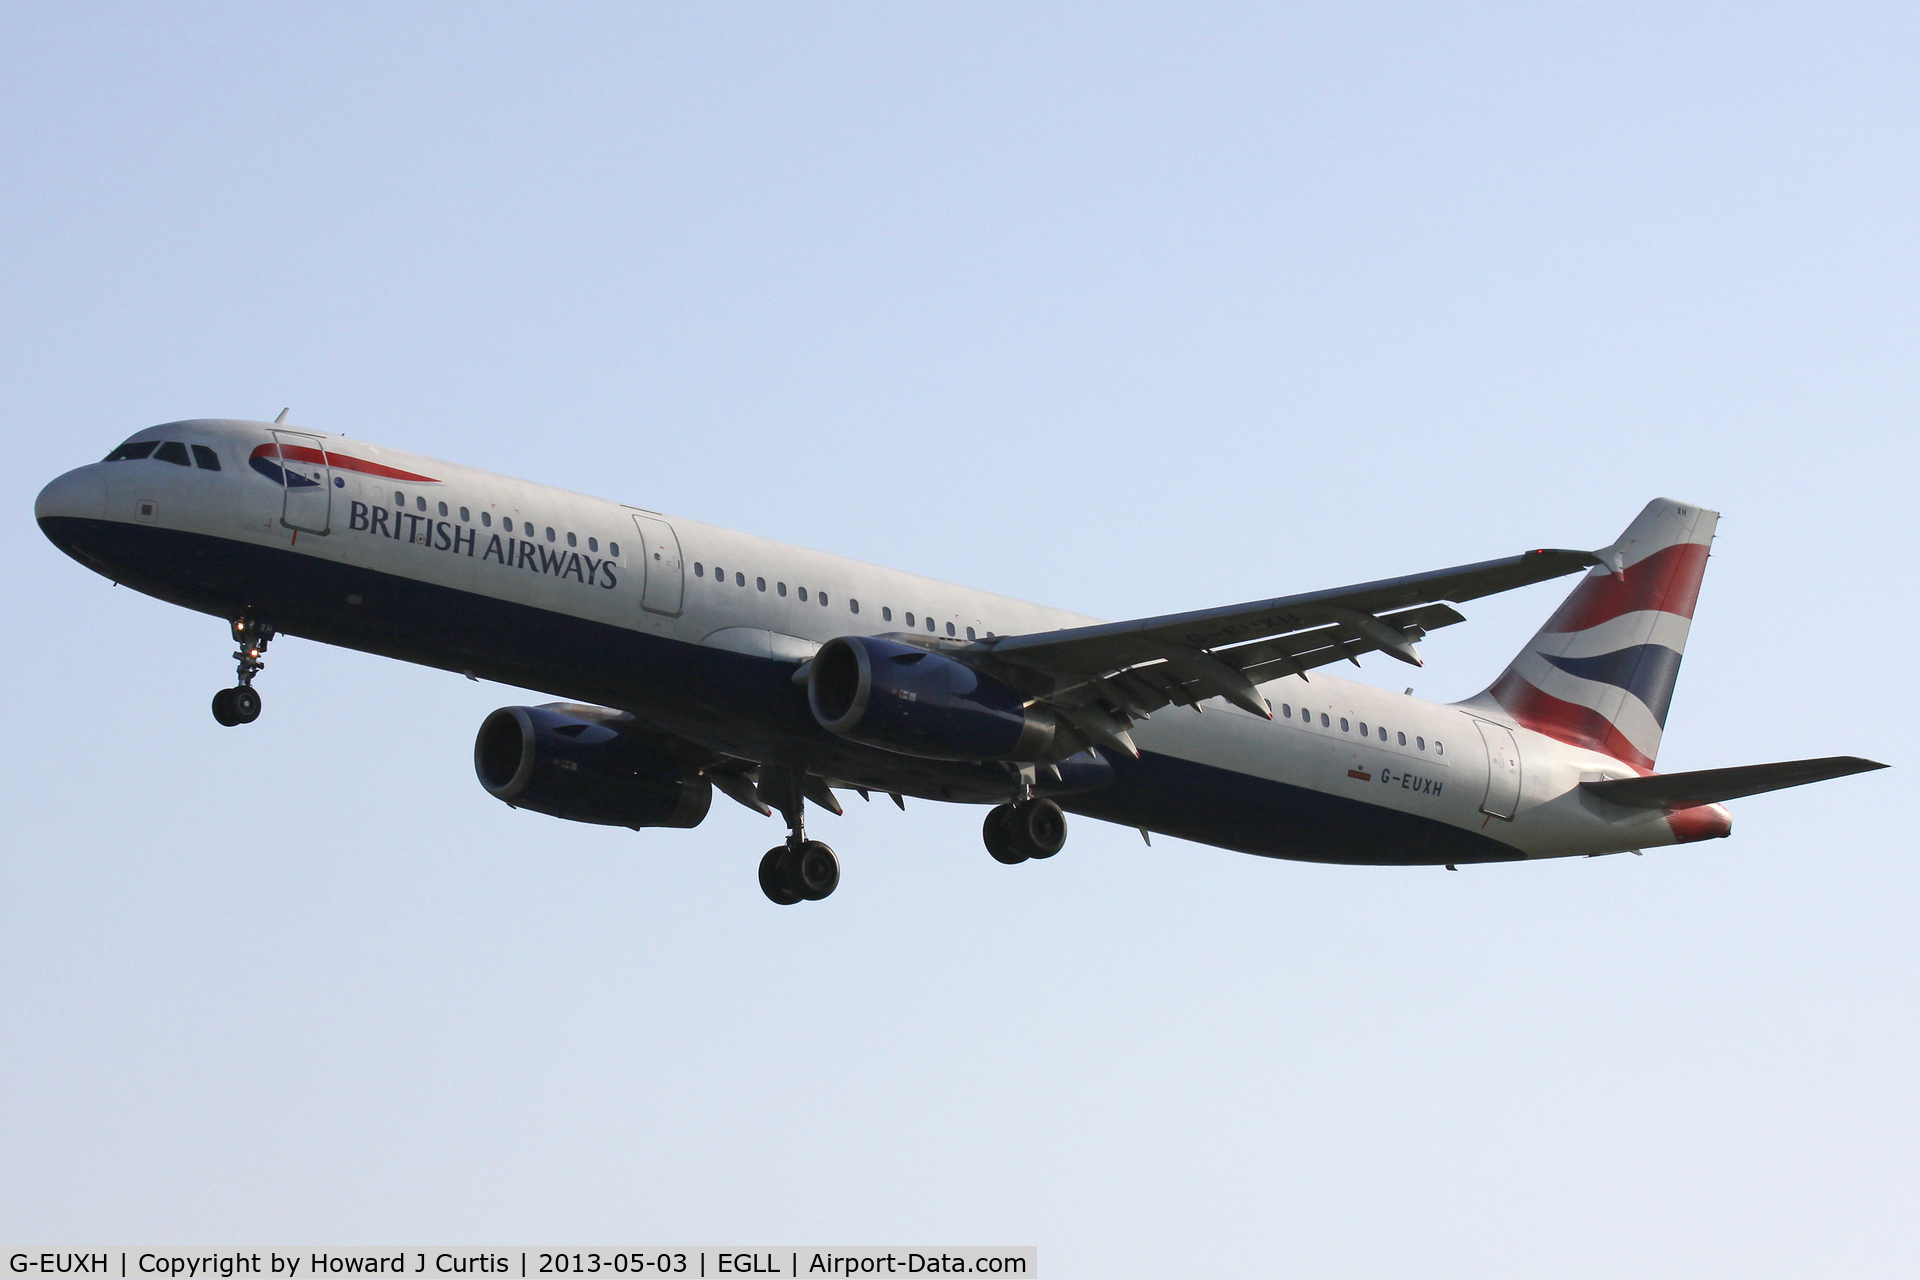 G-EUXH, 2004 Airbus A321-231 C/N 2363, British Airways, on approach to runway 27L.